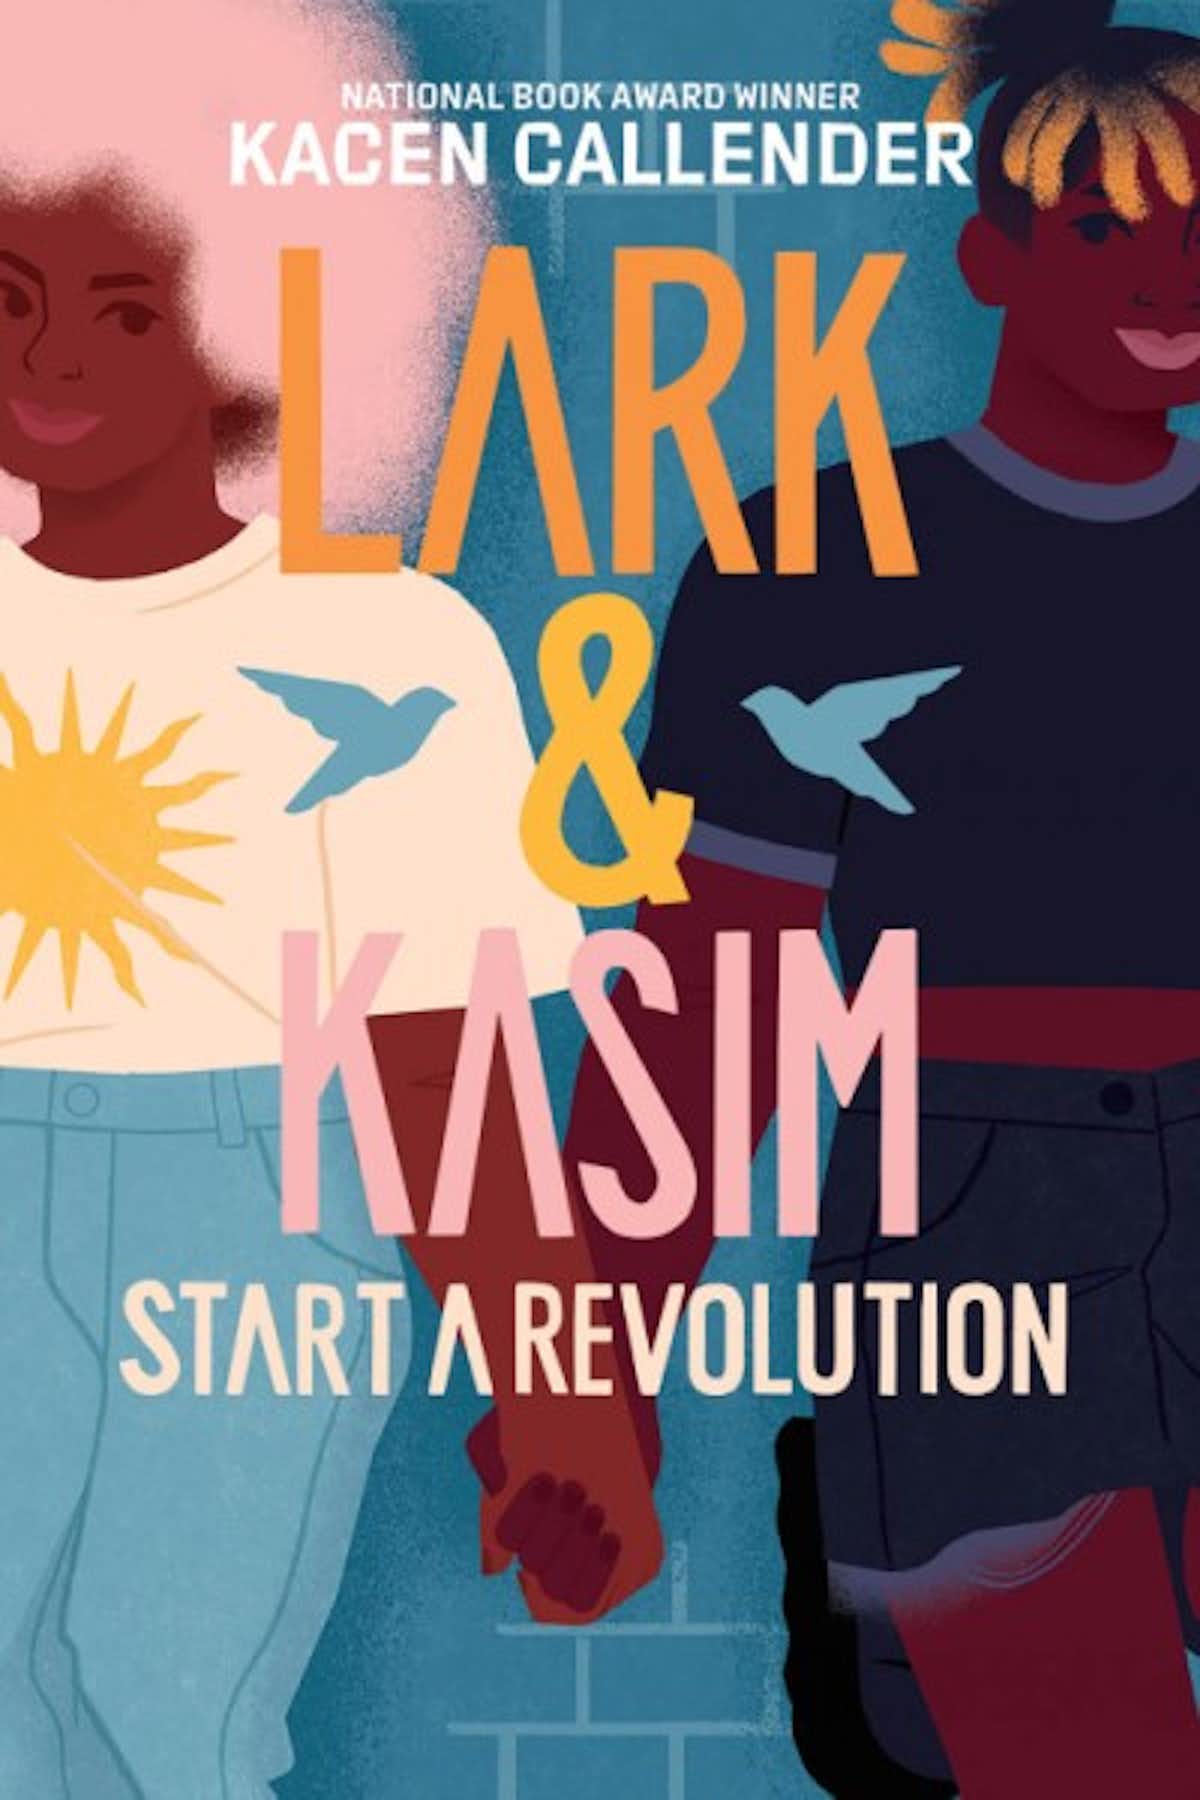 Two Black teens holding hands on a book cover